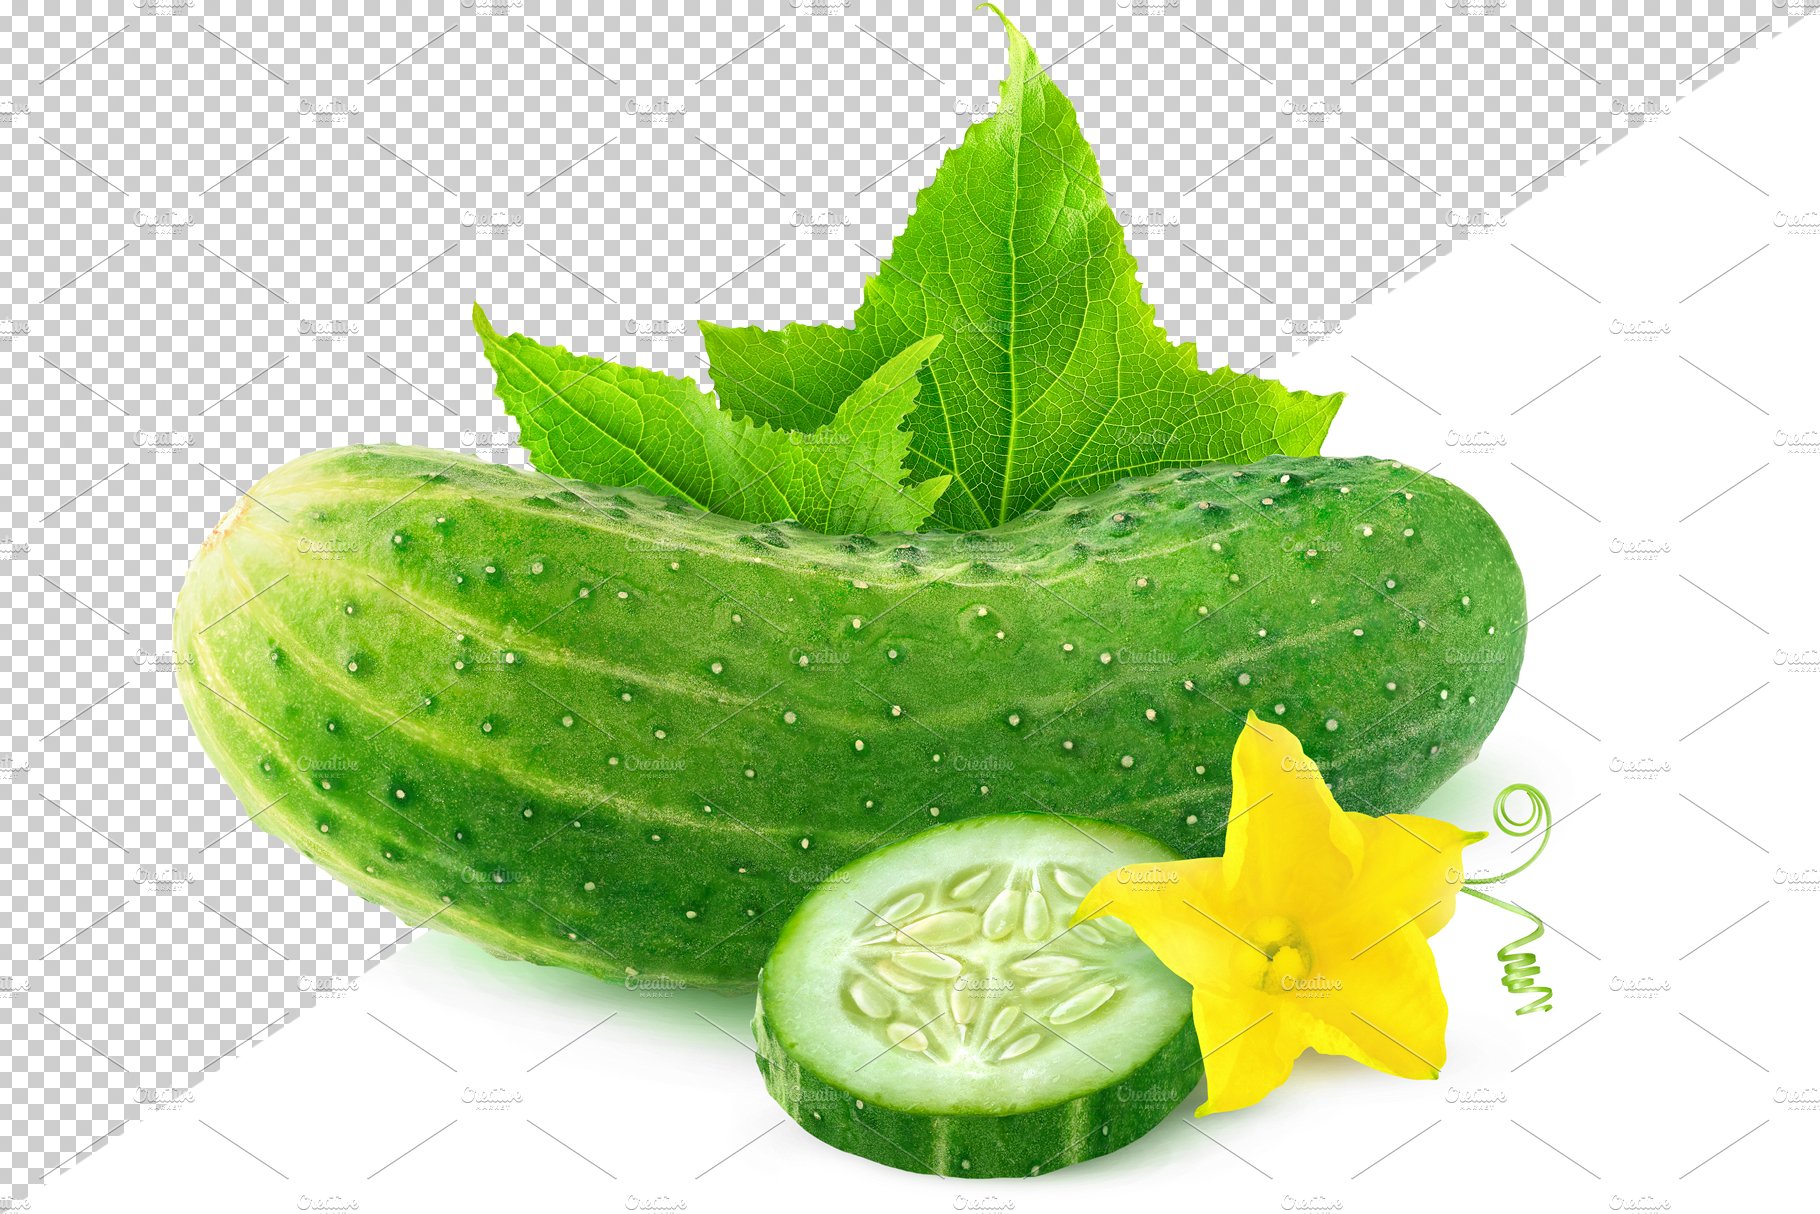 Cut cucumbers preview image.